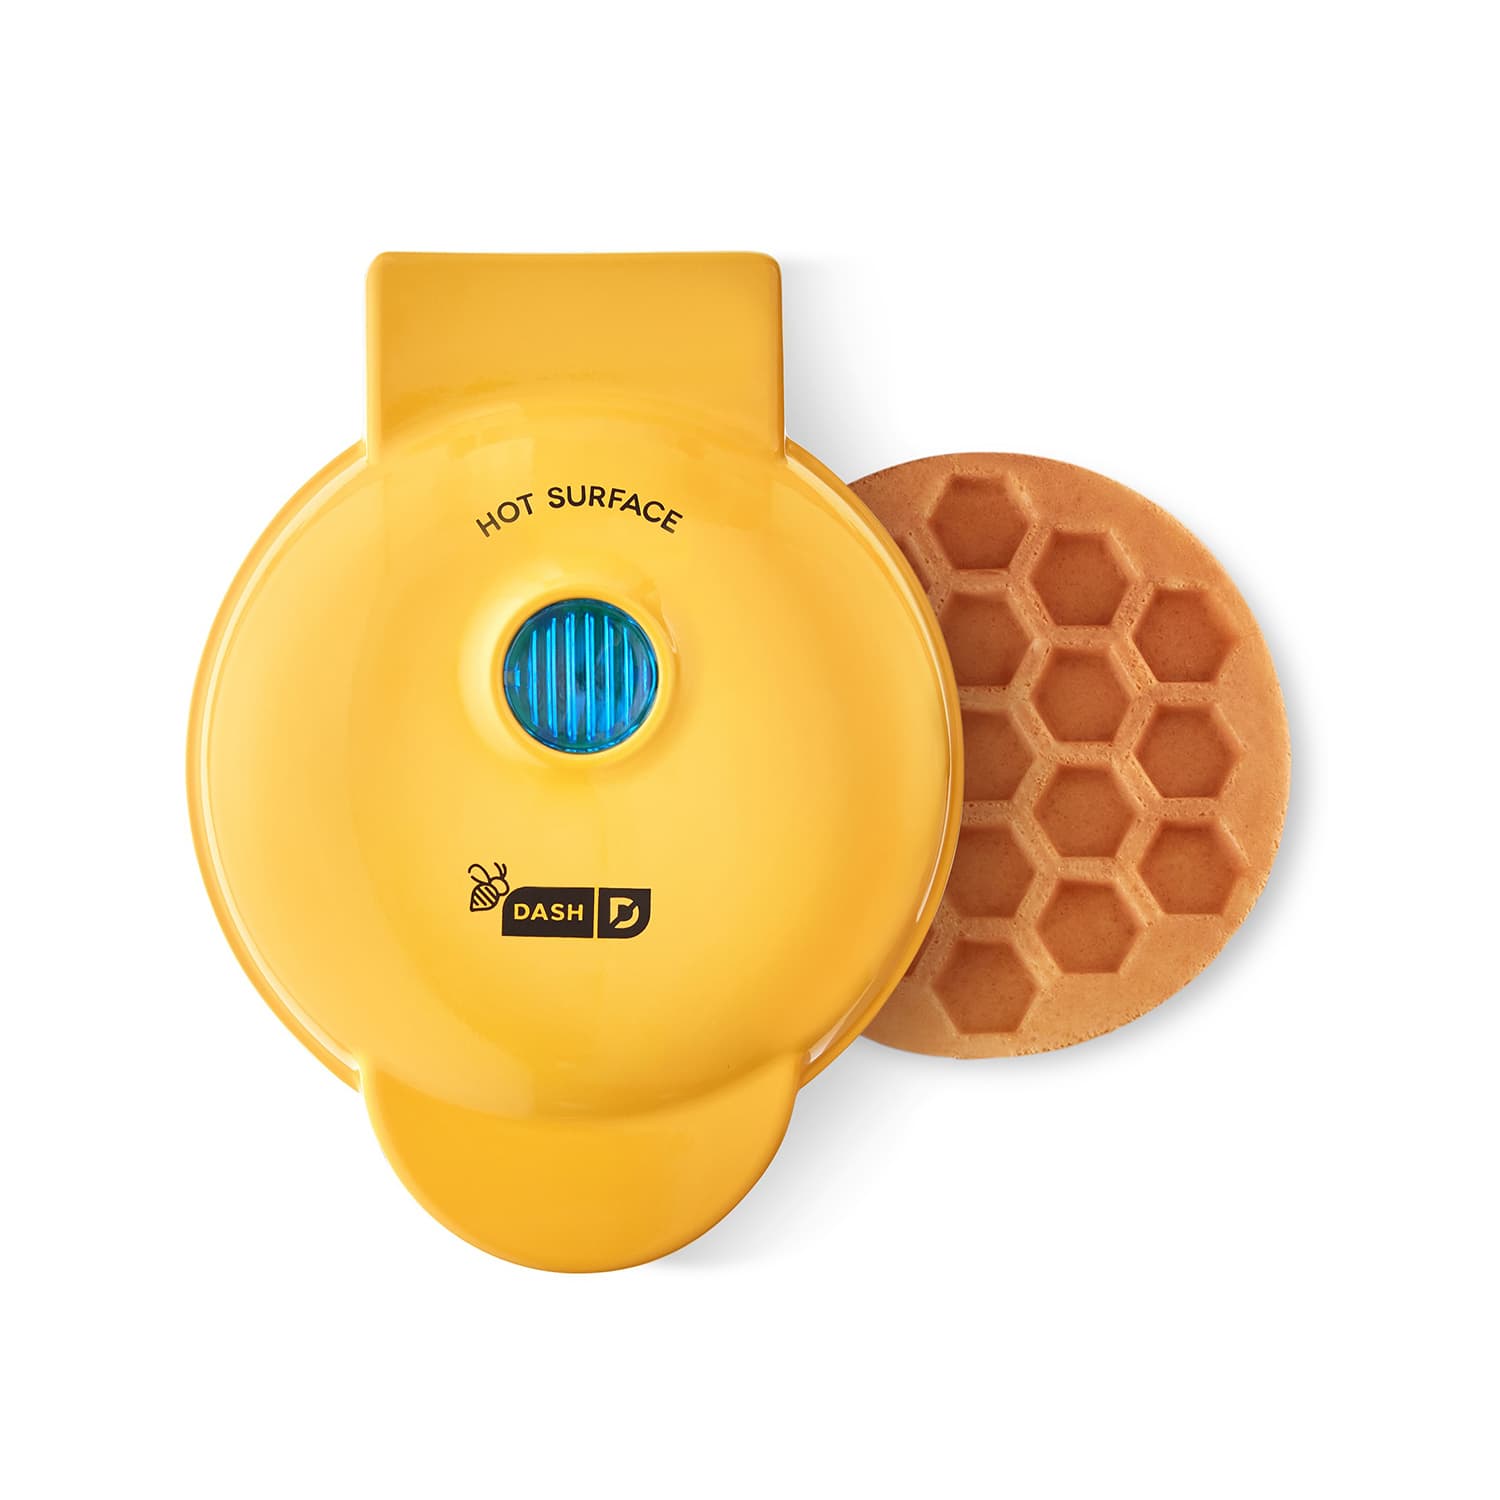 The Dash Mini Waffle Maker is Adorable — But Does It Work?